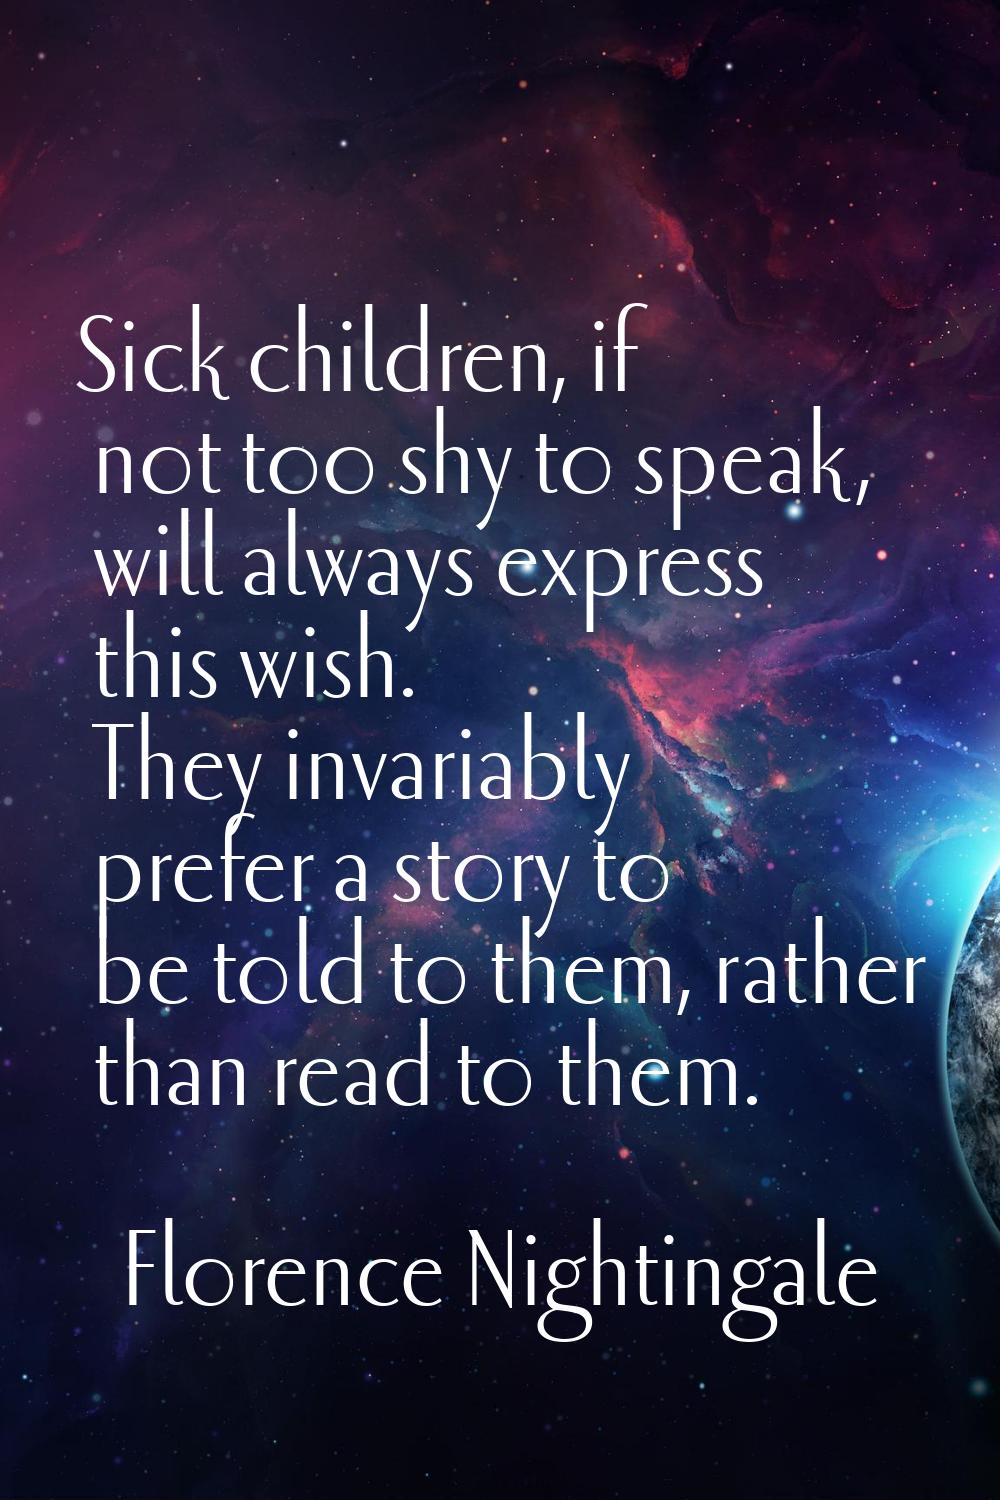 Sick children, if not too shy to speak, will always express this wish. They invariably prefer a sto